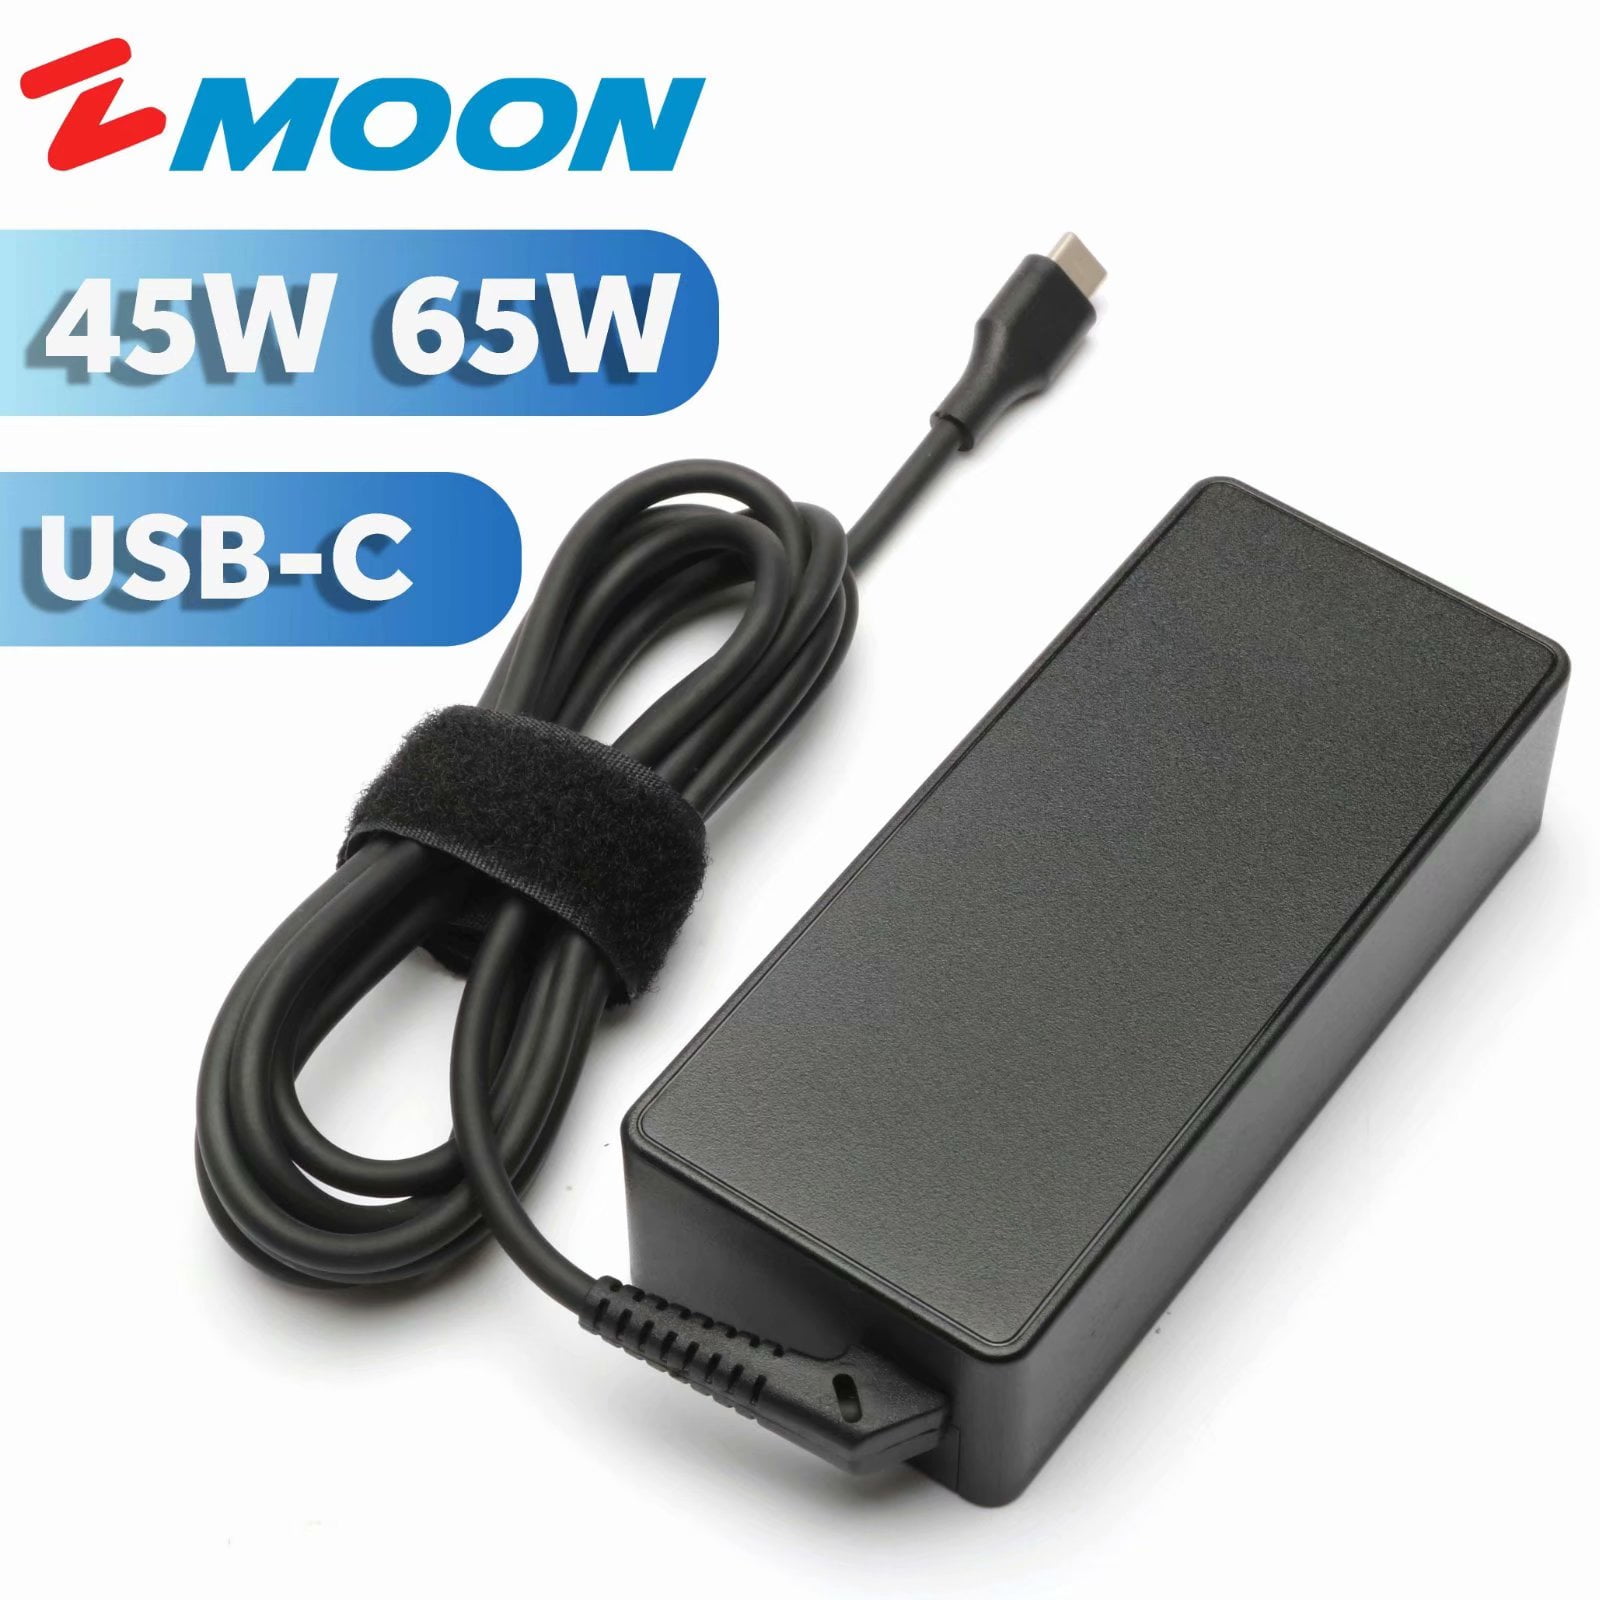 65W USB-C Charger AC Adapter Cord for Lenovo ThinkPad T14 T14s T15 L14 X13  L15 E15 E14 L13 ThinkPad X13 L13 t480 t490 t580 t590 Yoga X1 Carbon Hero X1  Yoga Hero